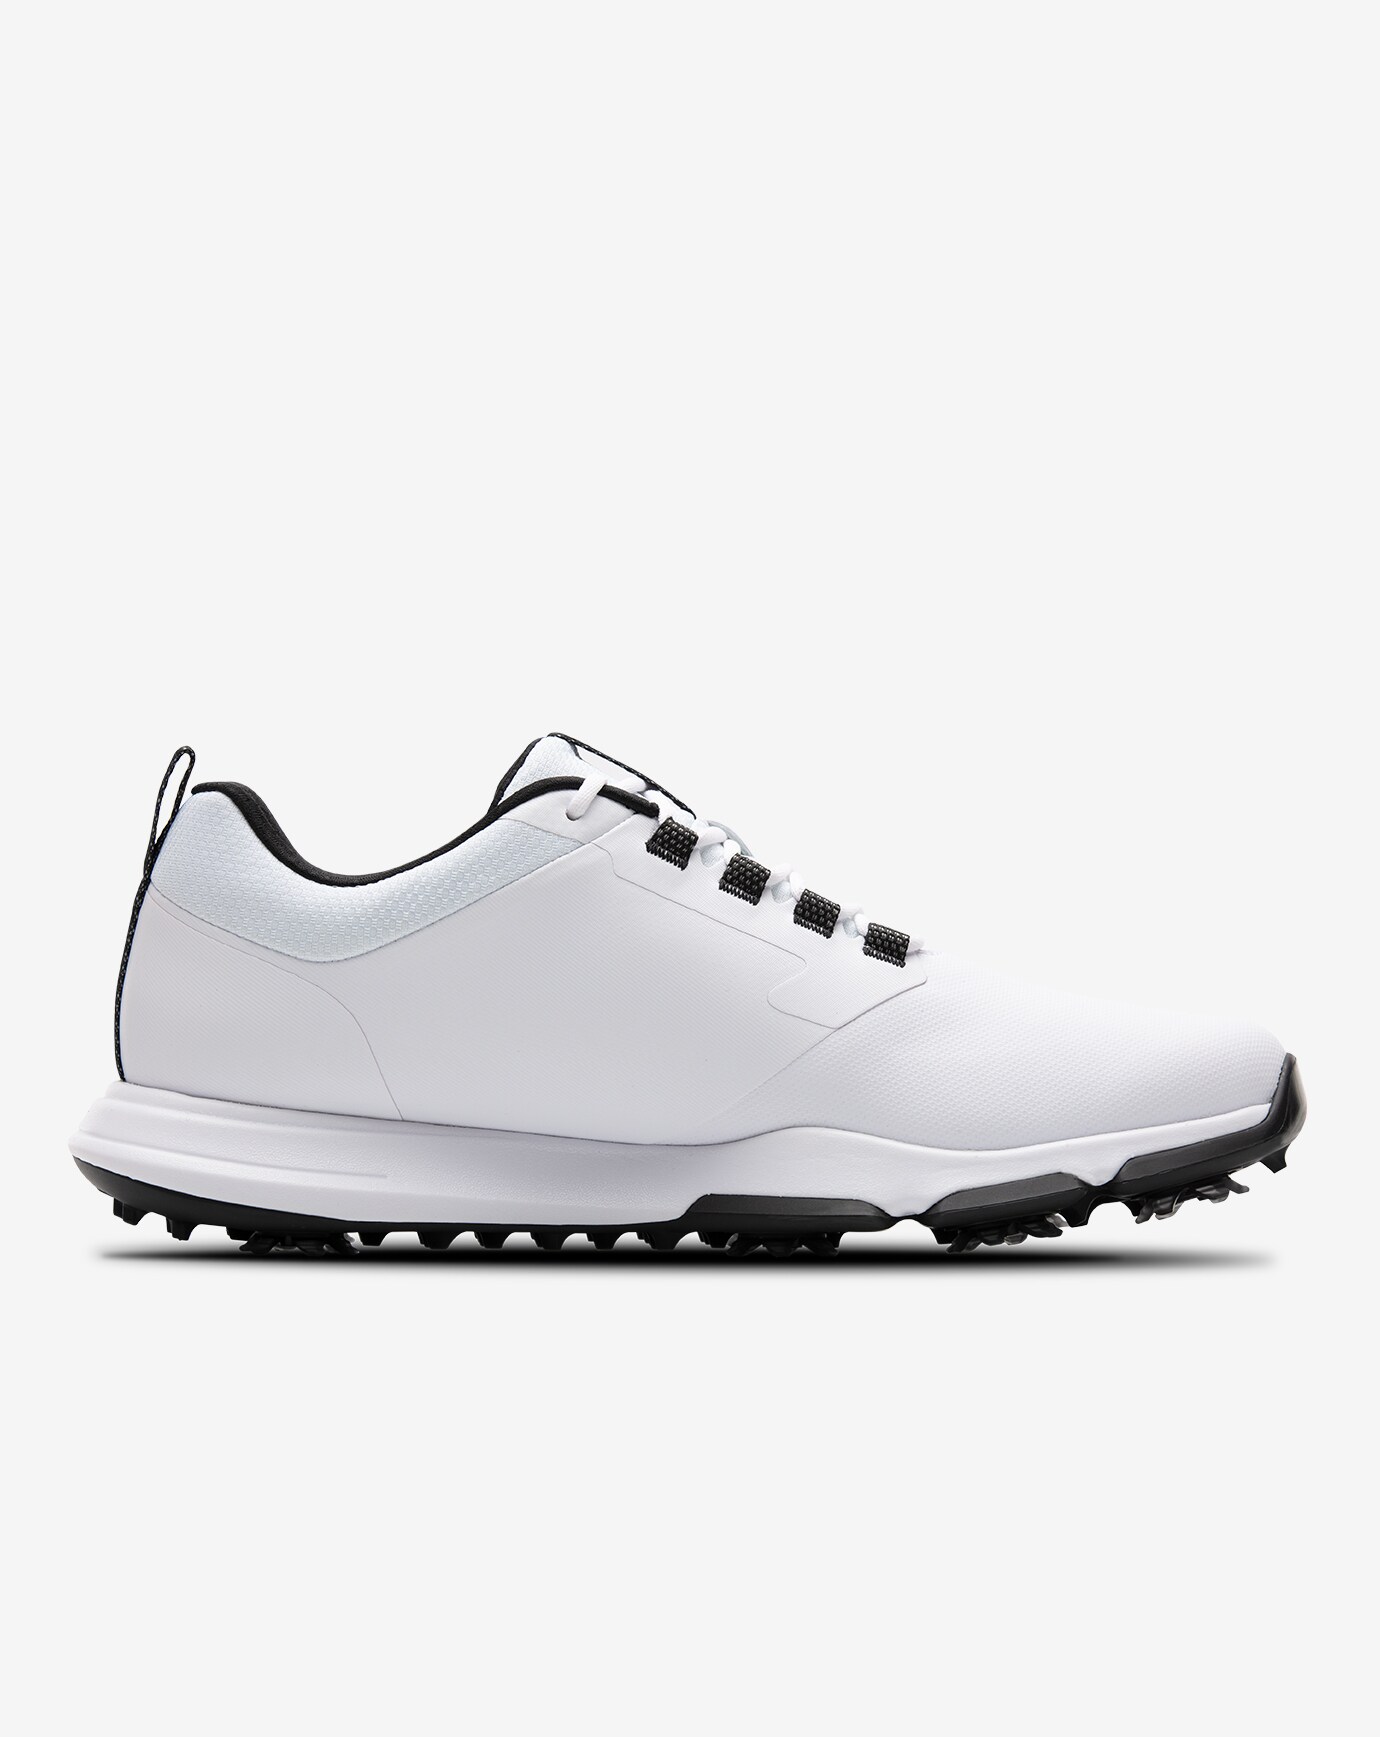 THE RINGER SPIKED GOLF SHOE Image 3